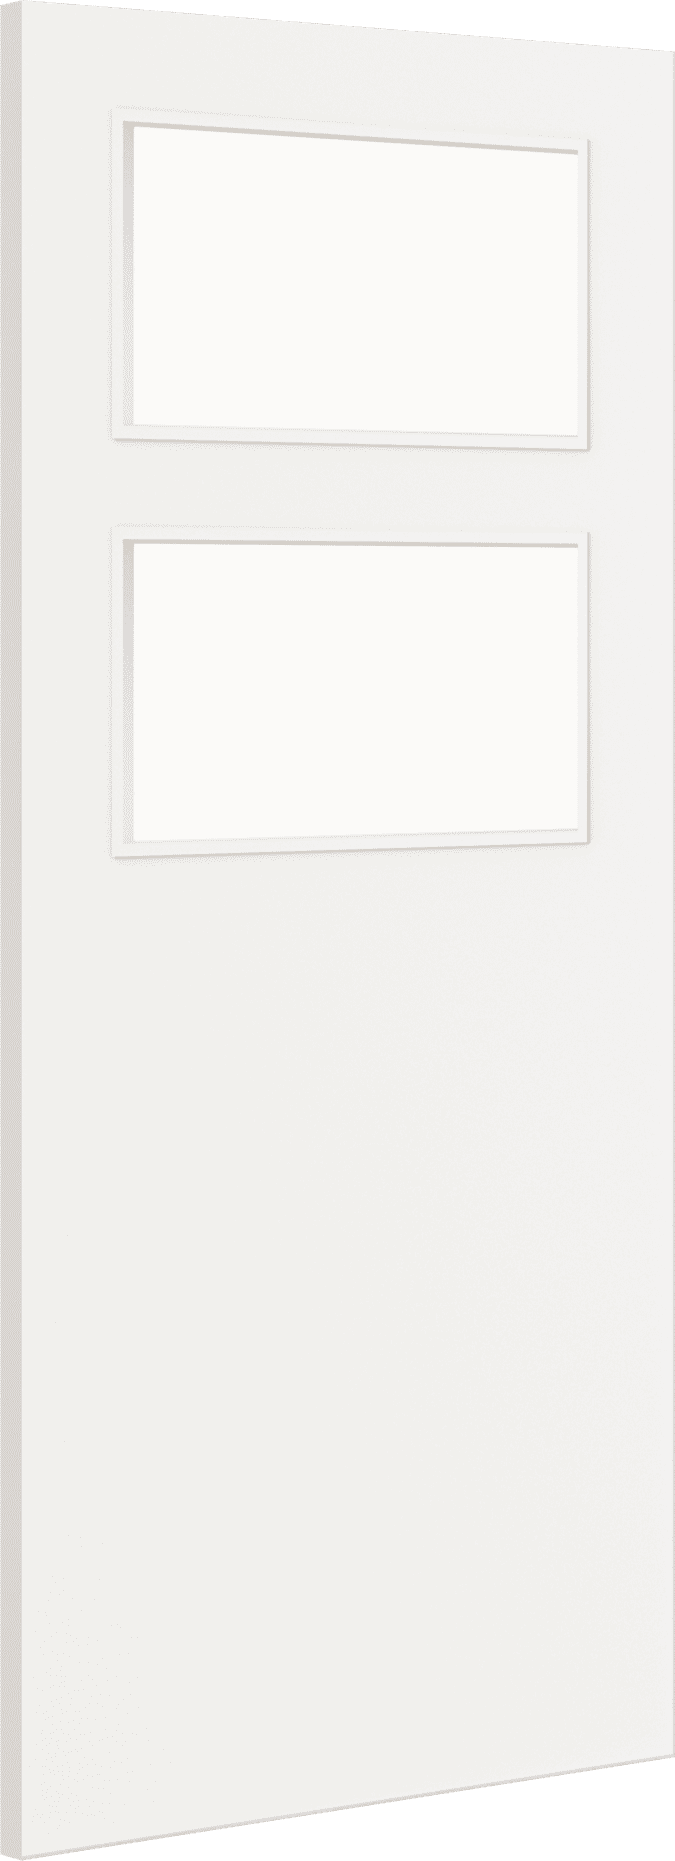 2040mm x 726mm x 44mm Architectural Paint Grade White 02 Frosted Glazed Fire Door Blank